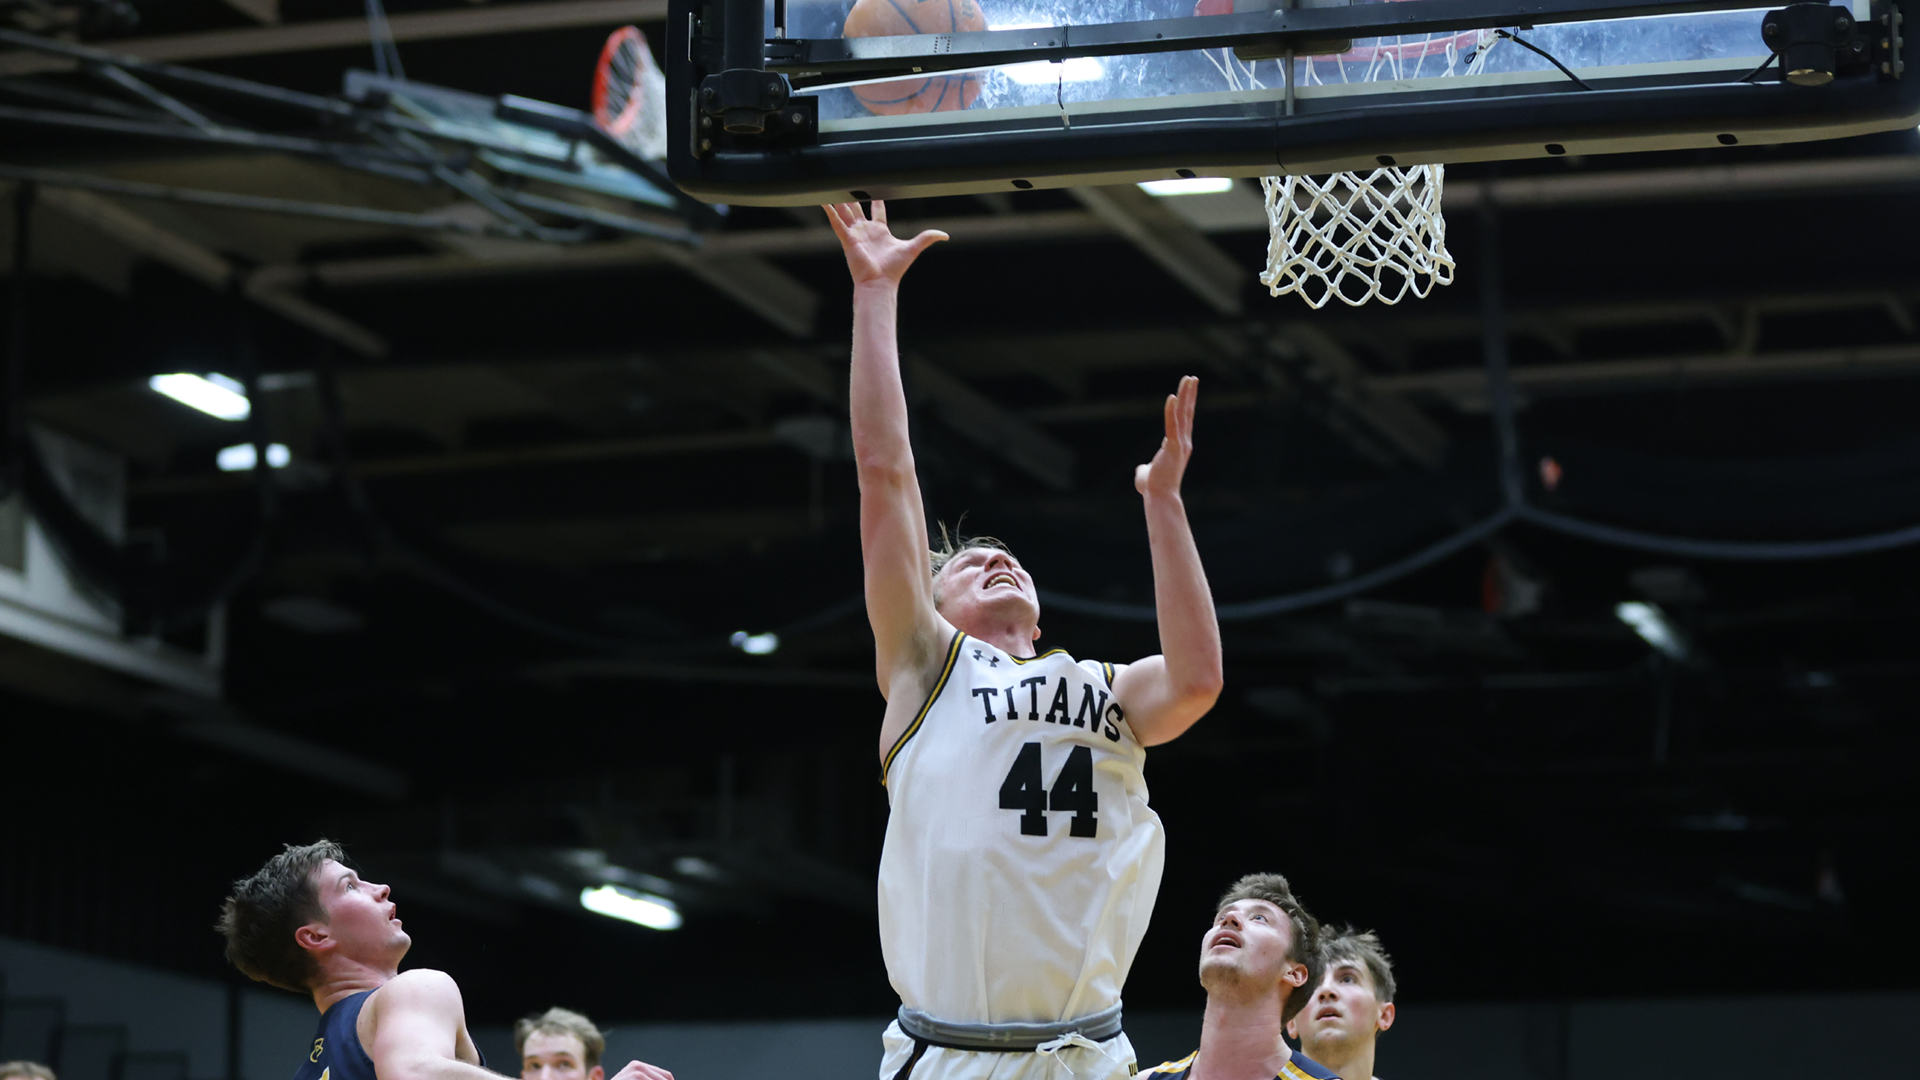 Tristan Johanknecht led the Titans with 18 points along with eight rebounds against the Blue Devils on Saturday